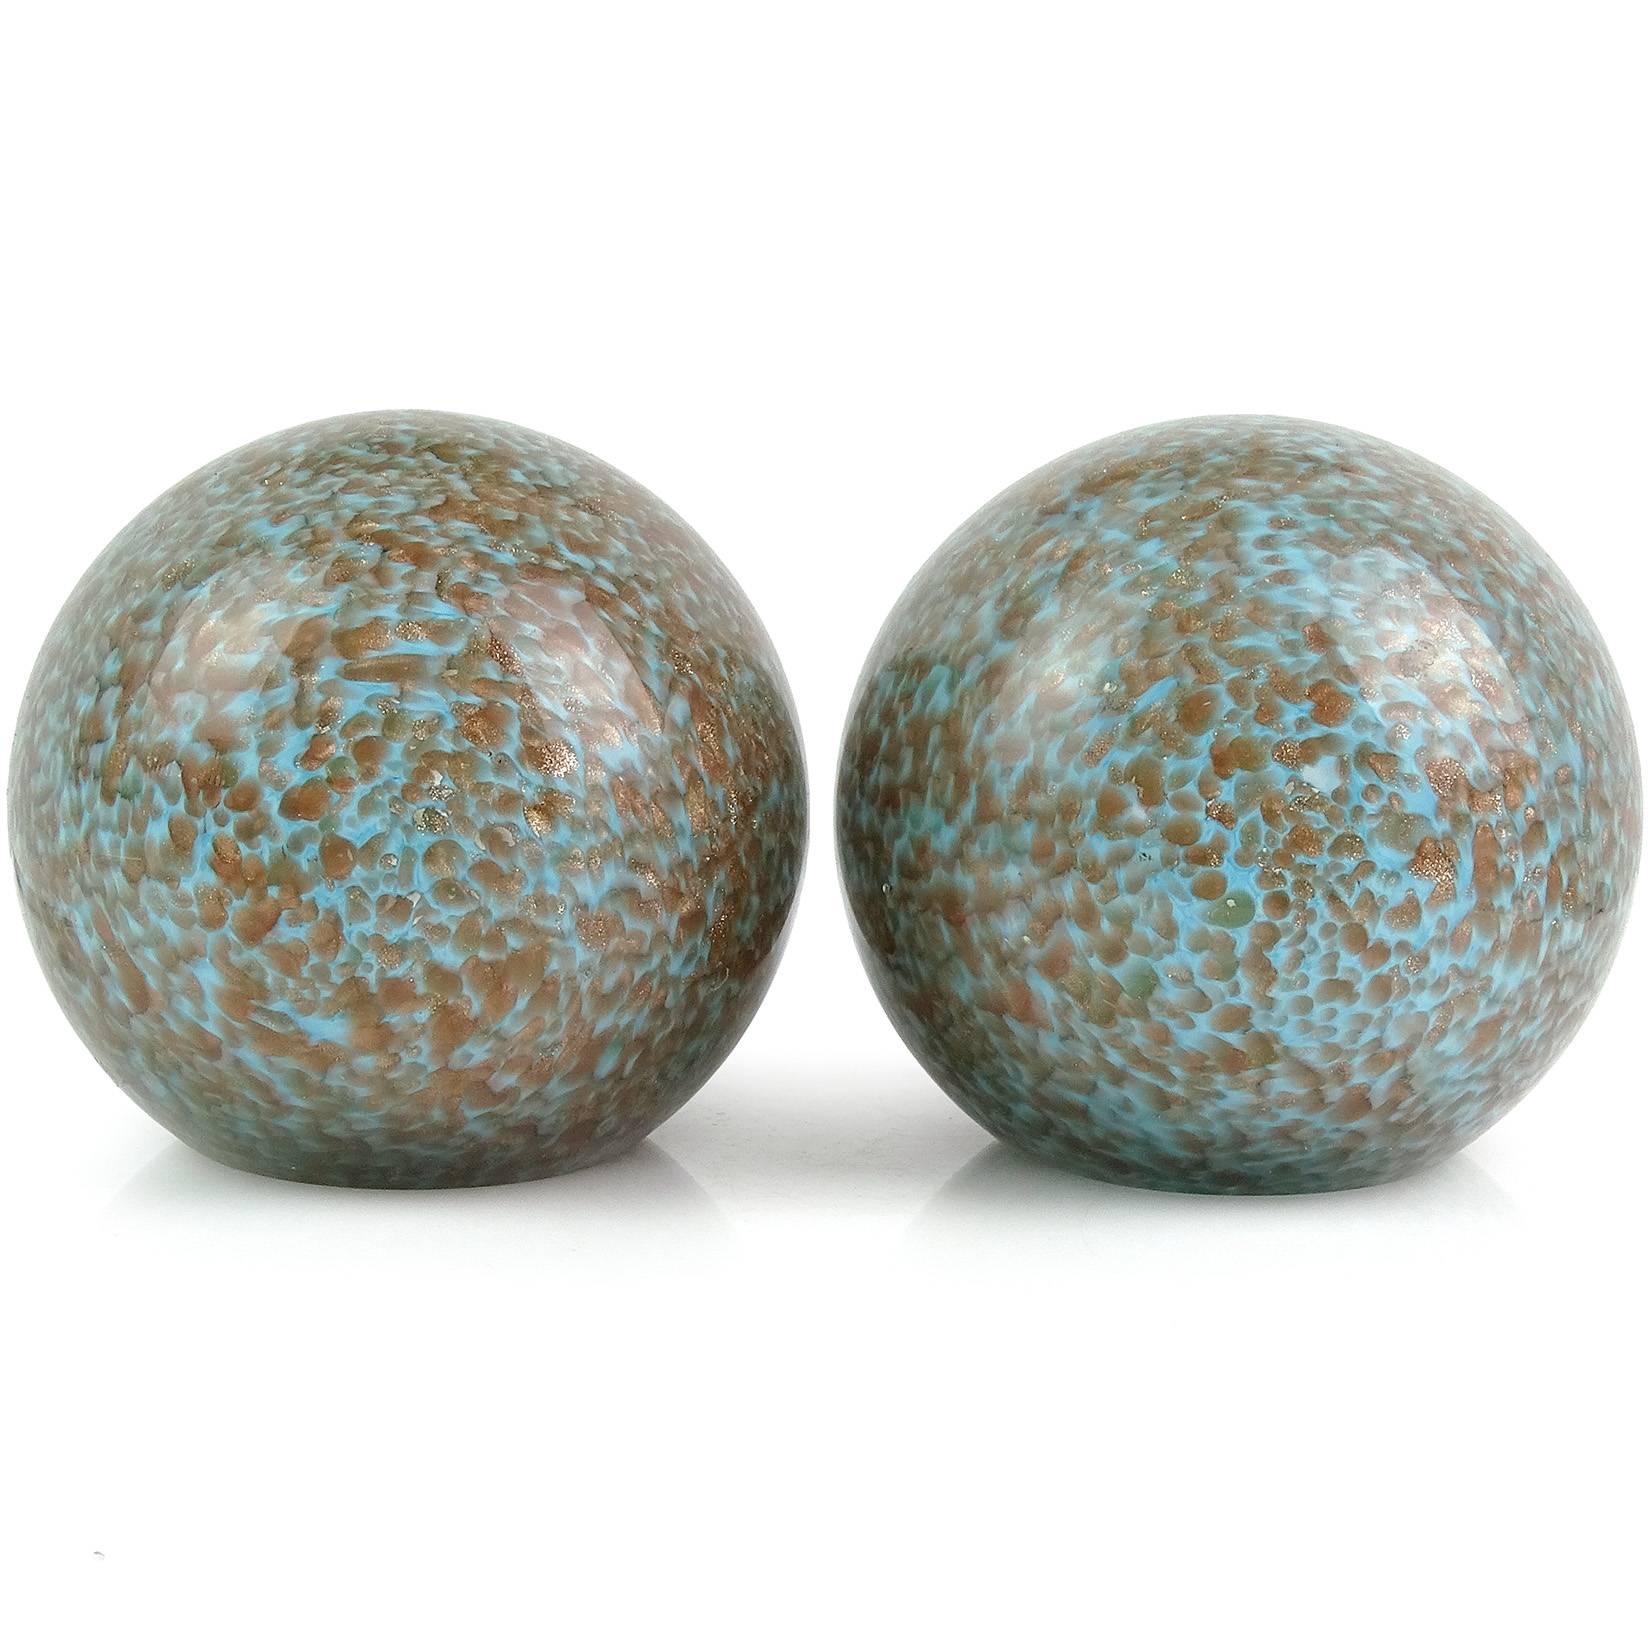 Murano handblown light blue with copper aventurine flecks Italian art glass ball bookends. Attributed to the Fratelli Toso company. They are polished on two sides, looking like geode rocks (bottom side). The copper spots glitter all around them.